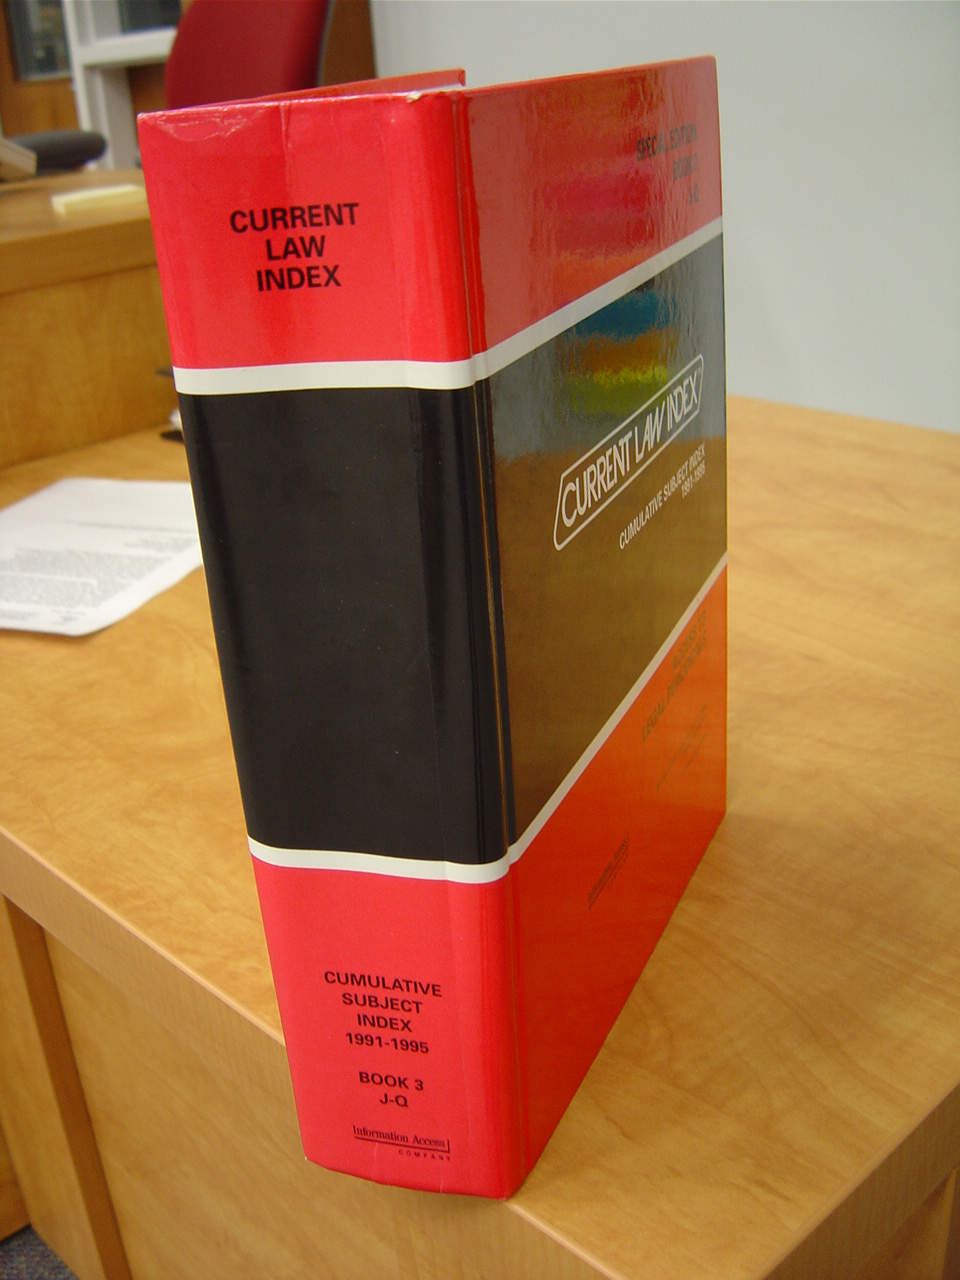 Law Library Bonus Pic: Current Law Index, one of the ways to access periodicals in the Law Library